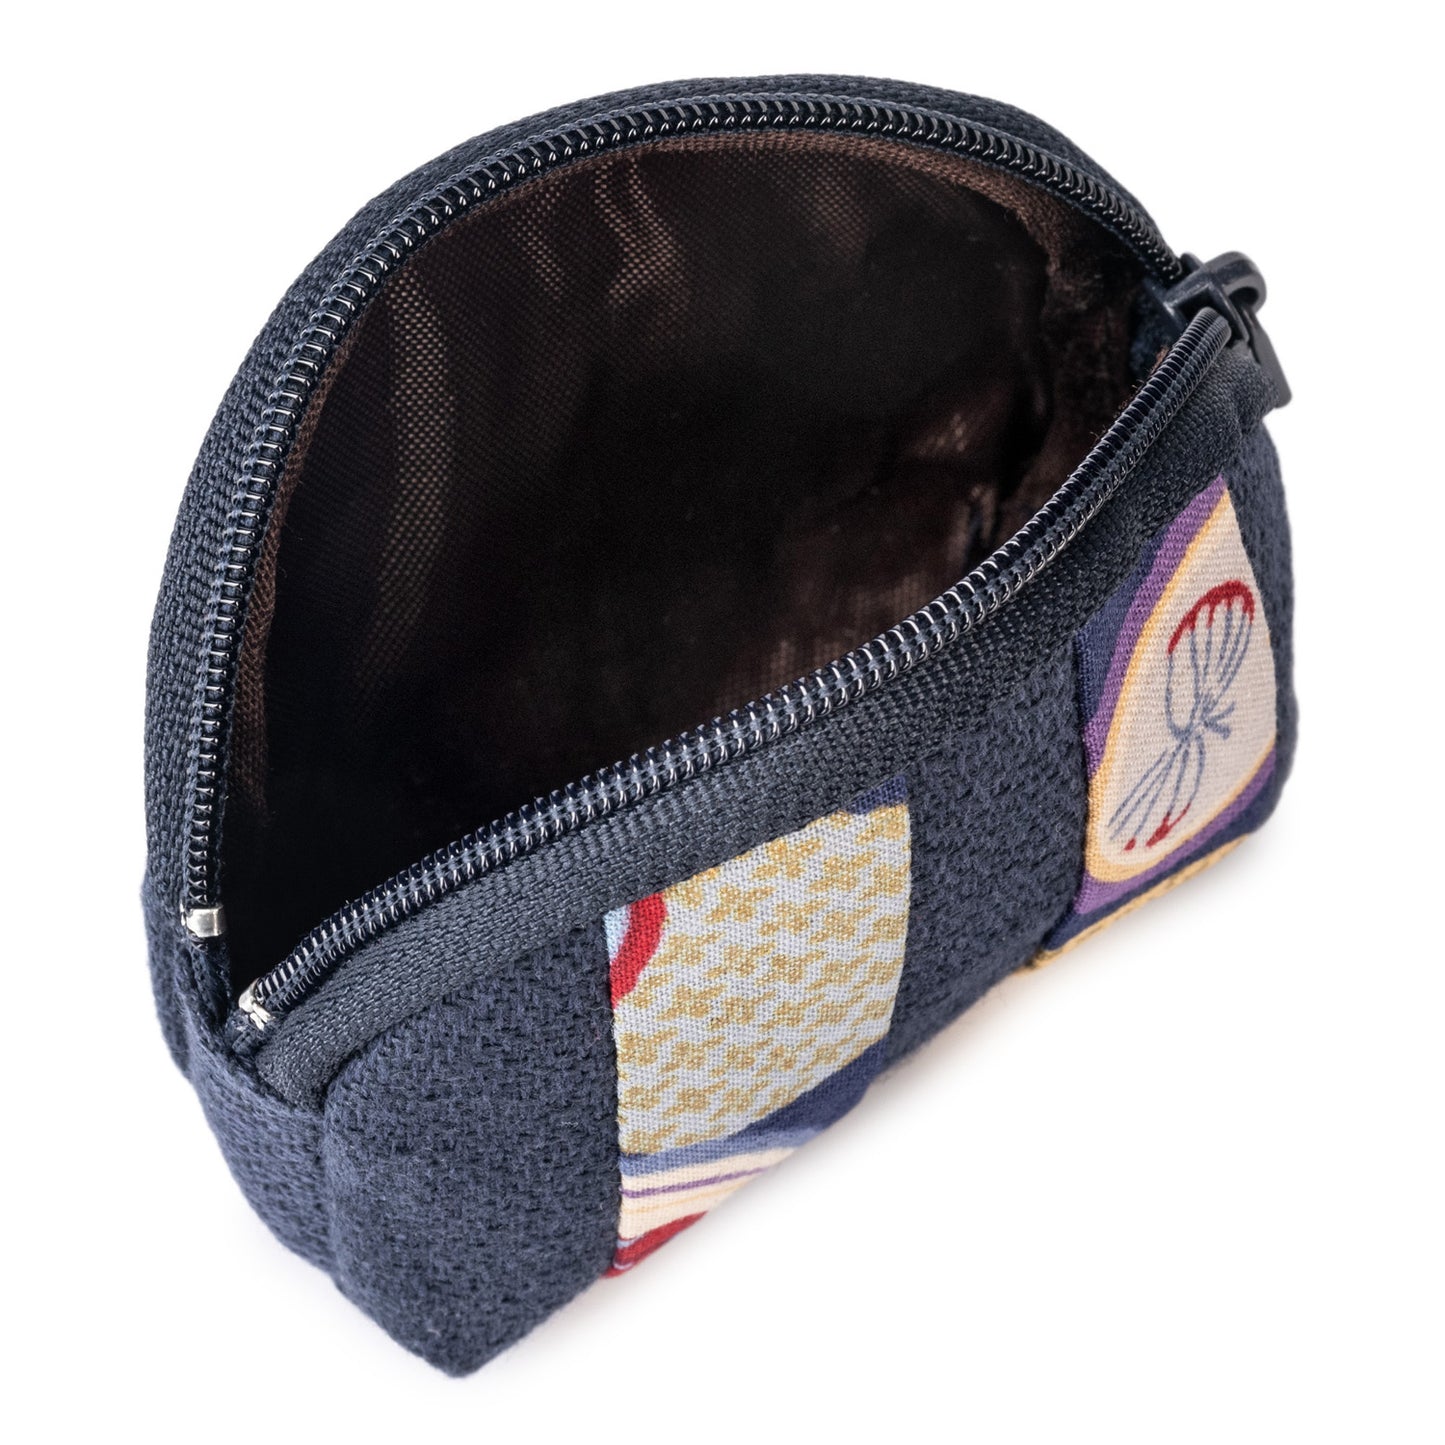 Small Navy Blue Japanese Pouch Bag